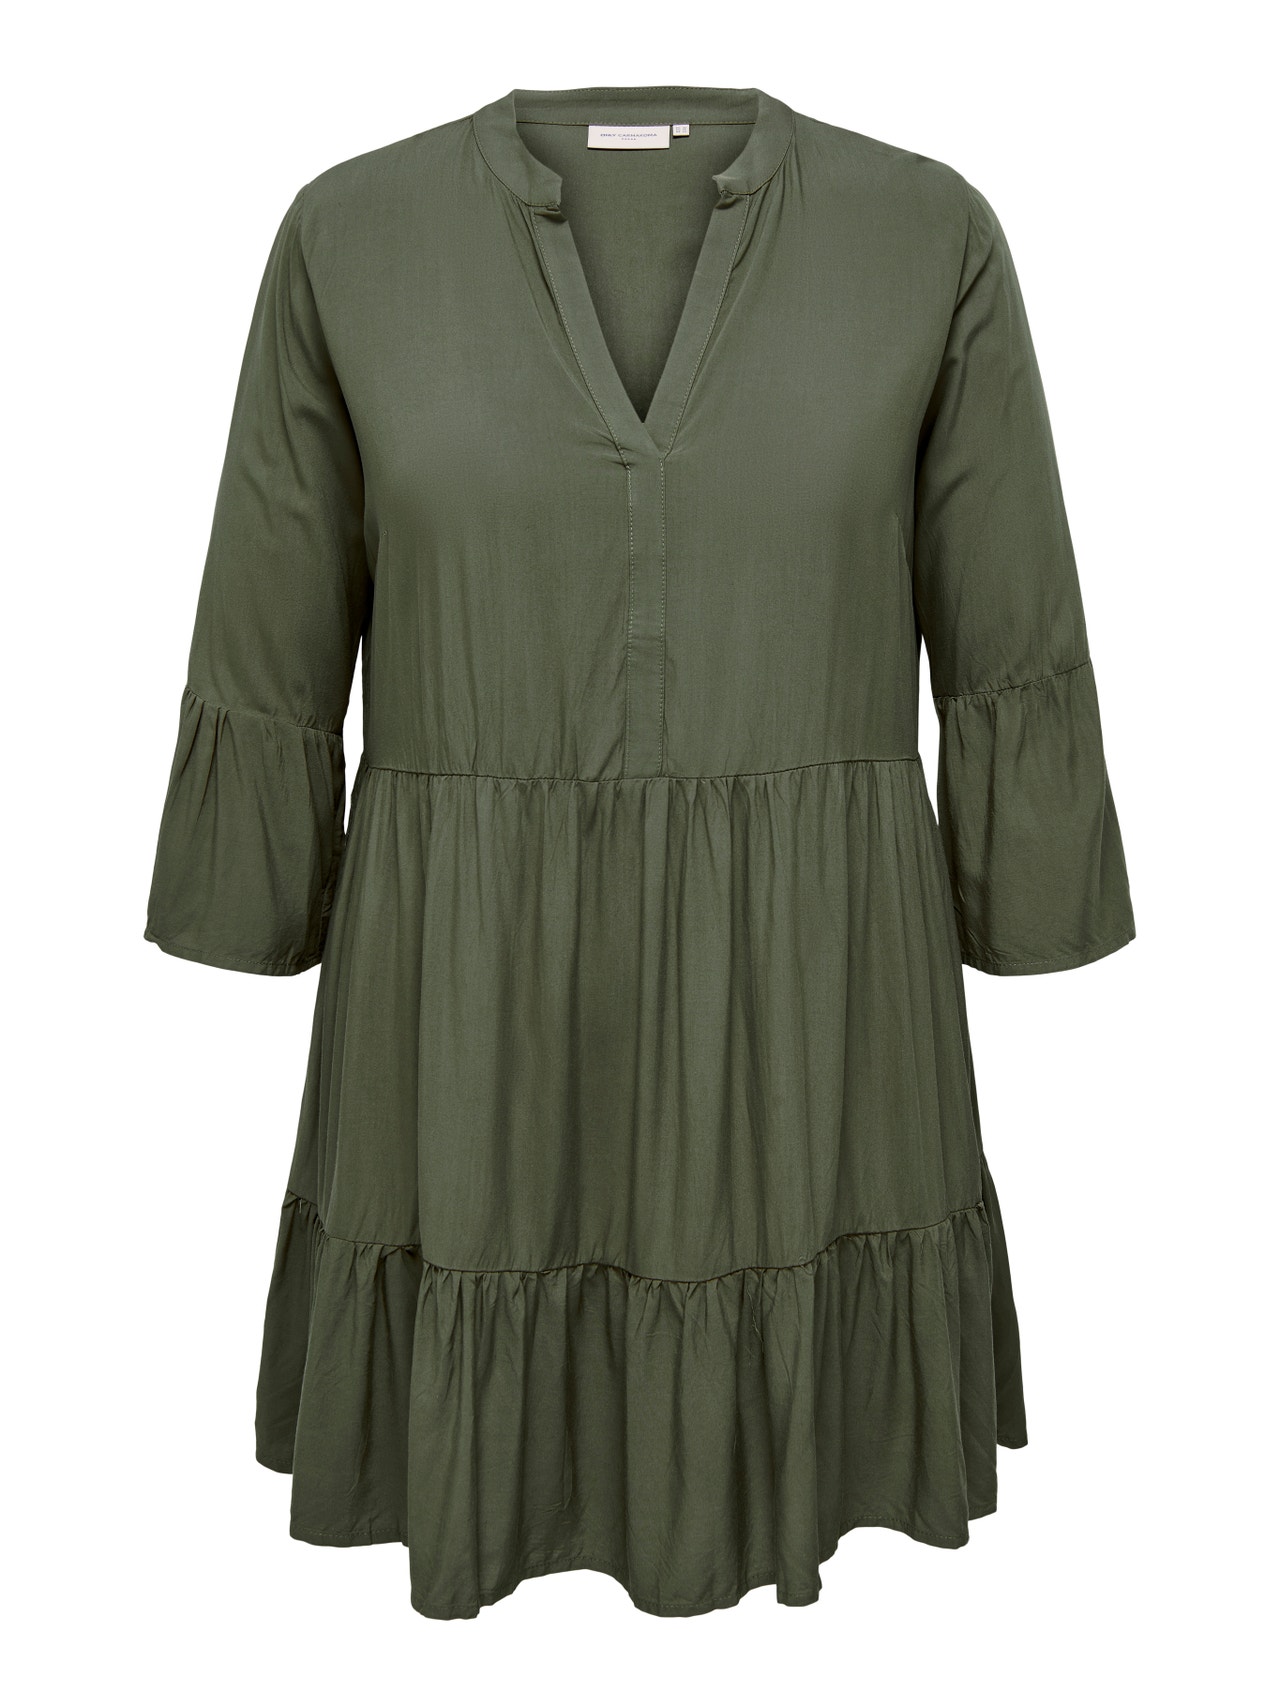 ONLY Curvy tunic dress -Olive Night - 15275353